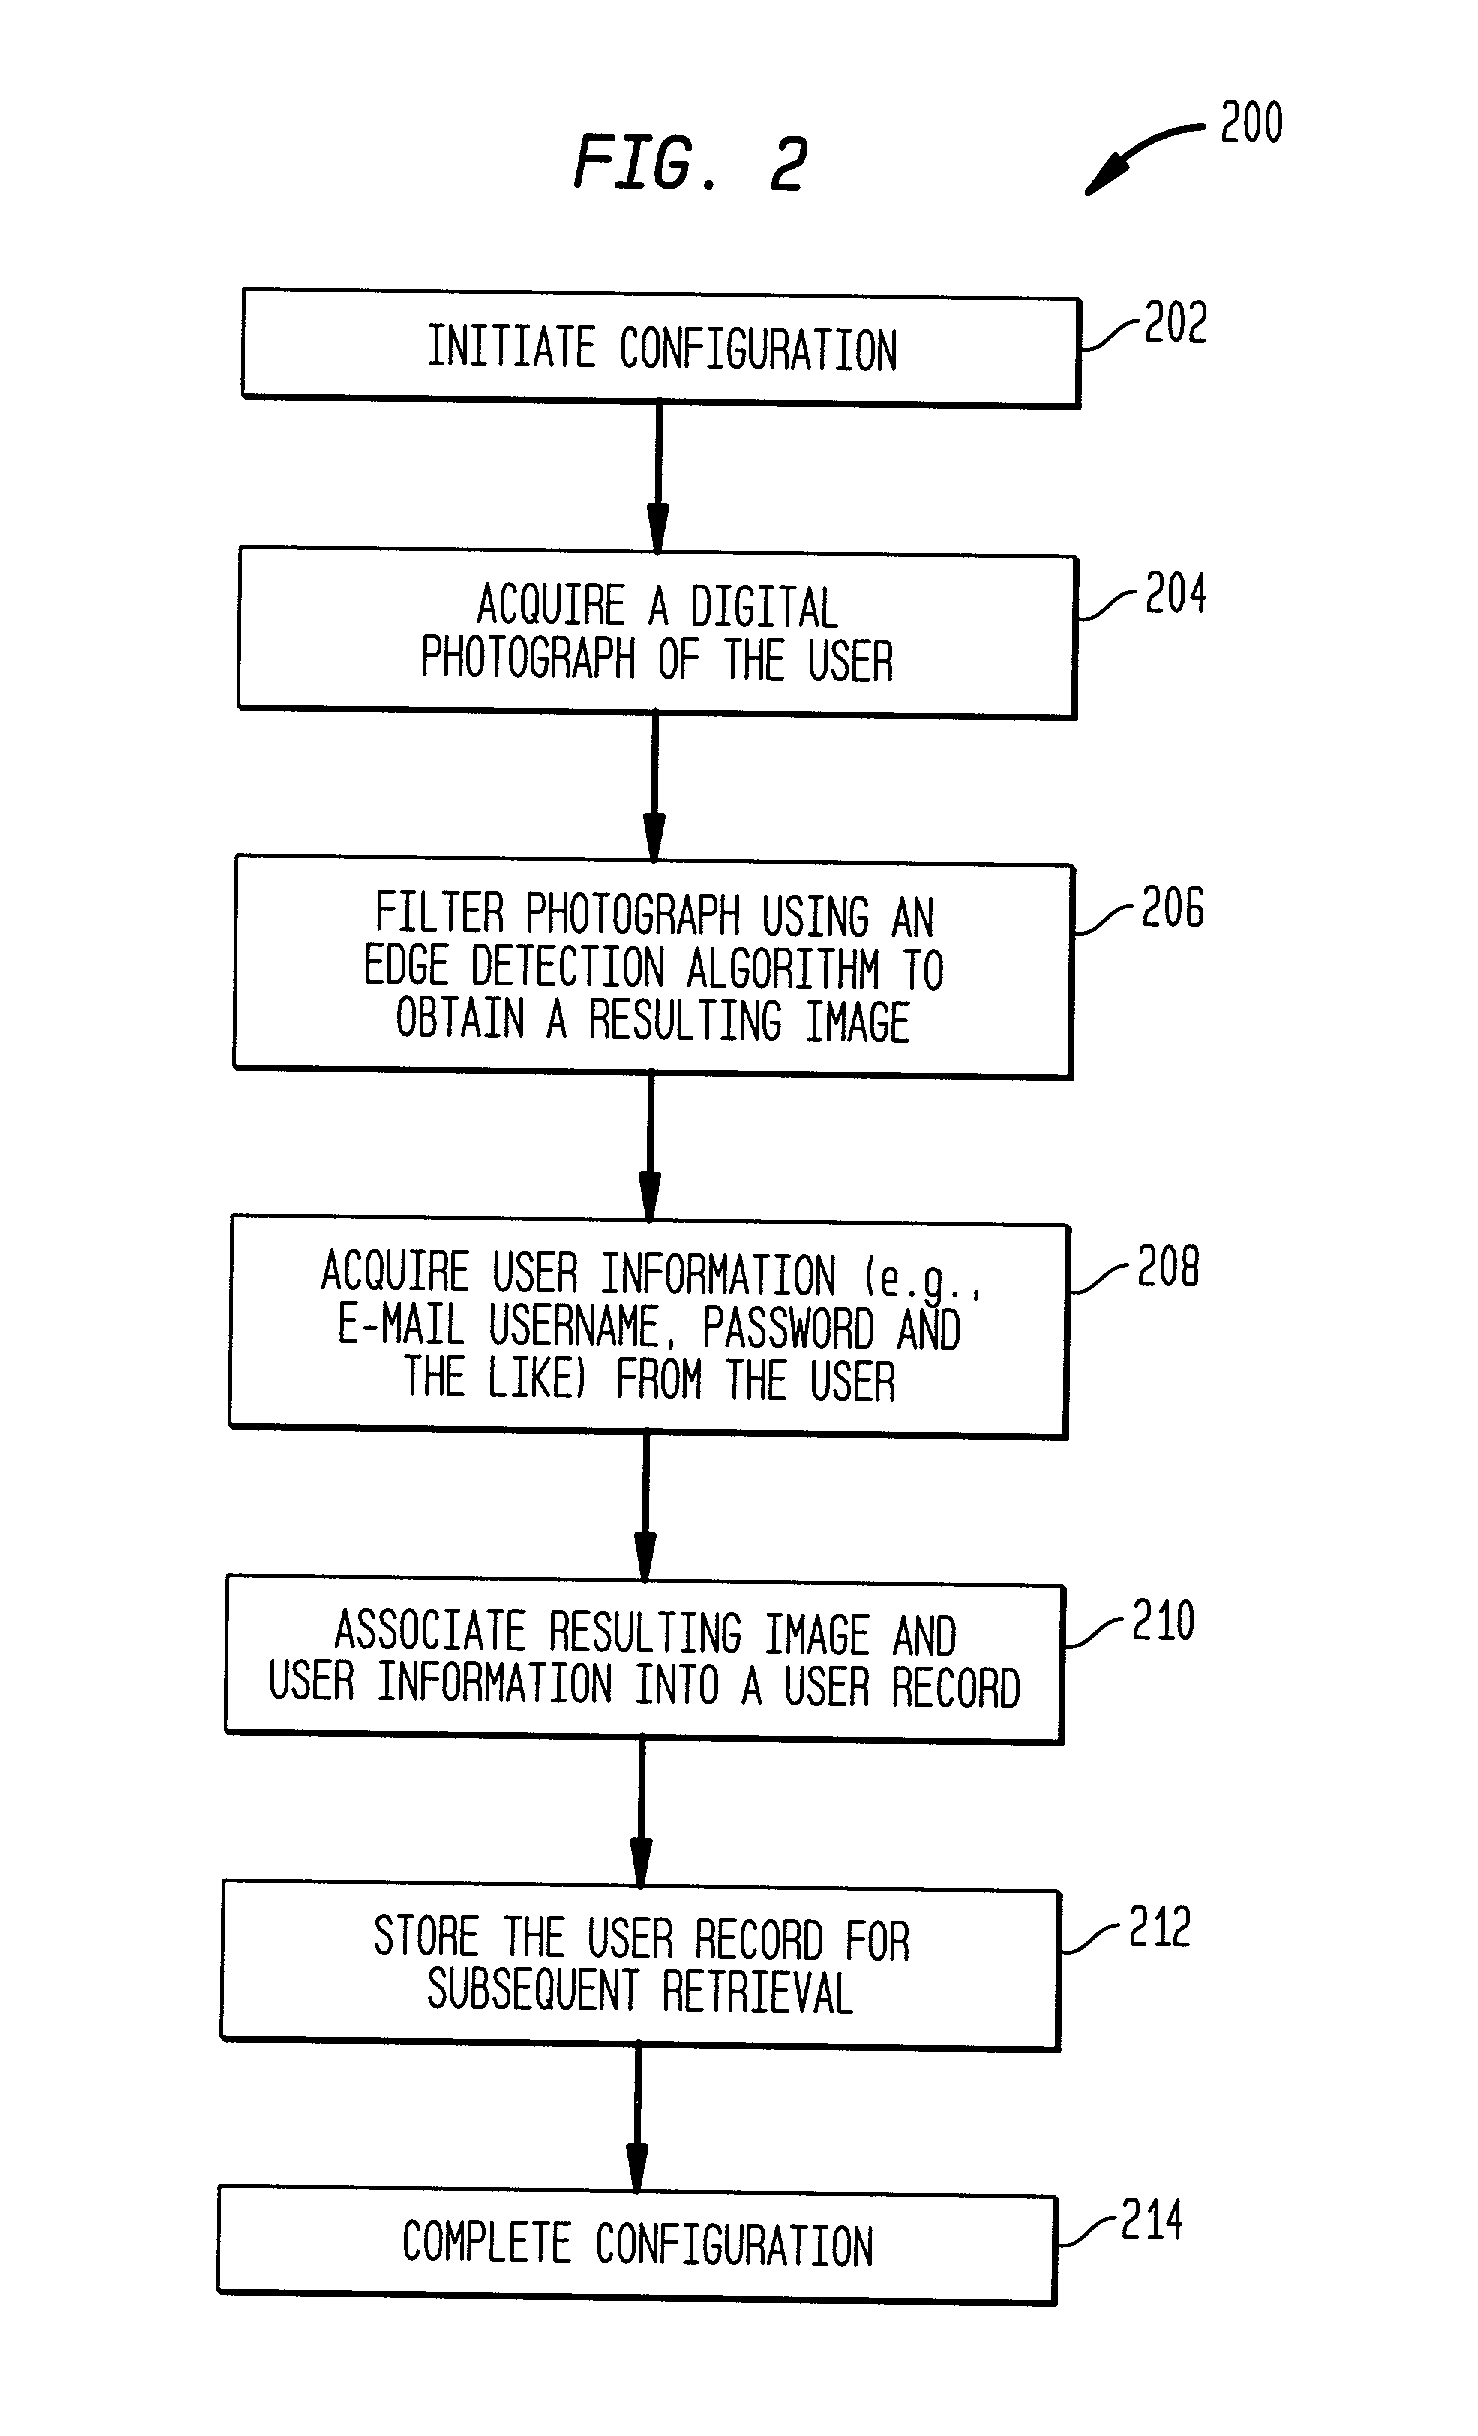 Method and system for providing application launch by identifying a user via a digital camera, utilizing an edge detection algorithm